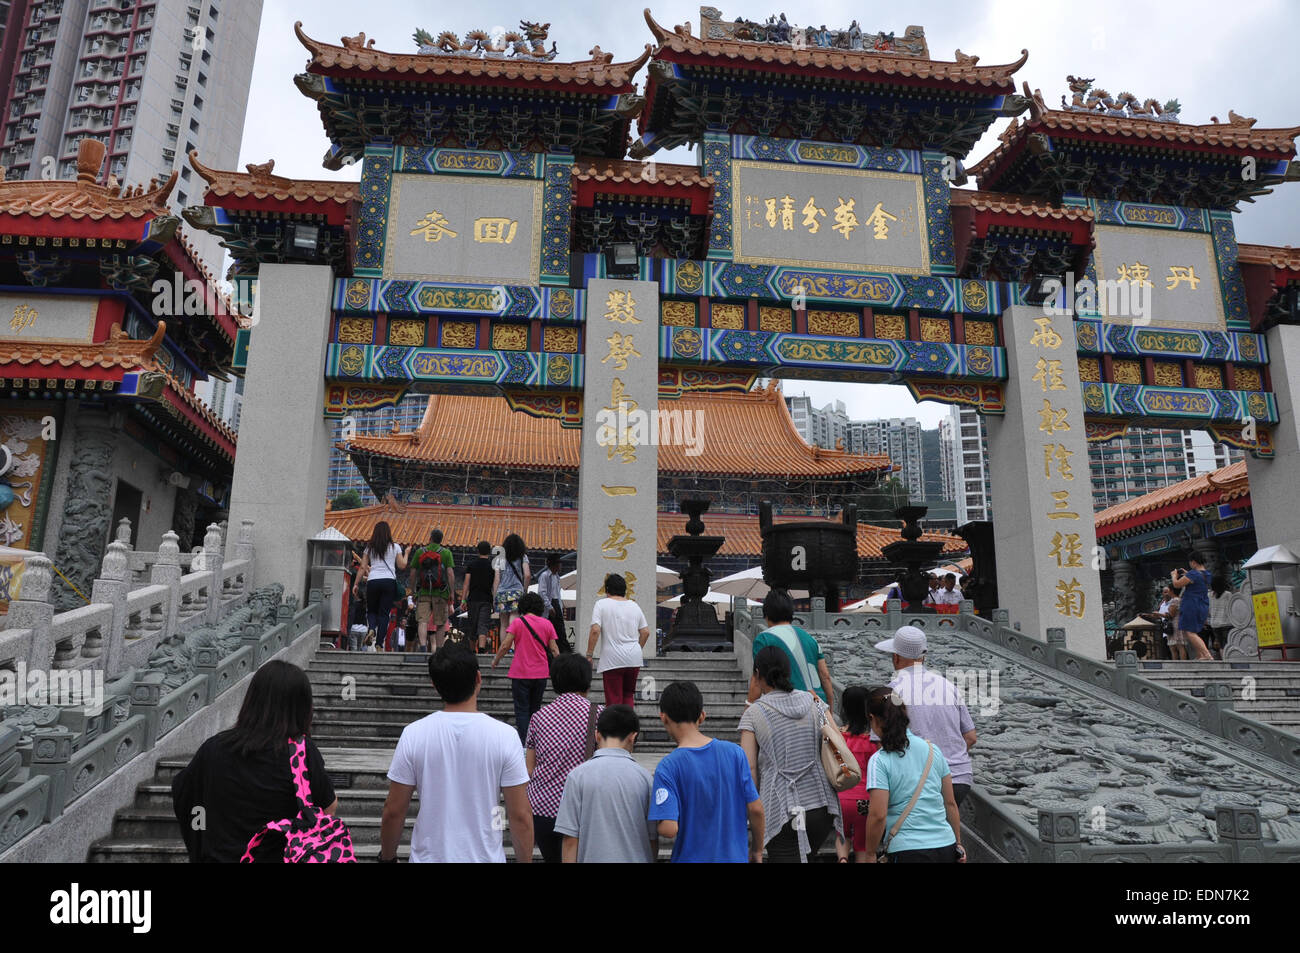 Sik Sik Wong Tai Sin temple, Kowloon, Hong Kong, which claims to 'make every wish come true upon request' Stock Photo